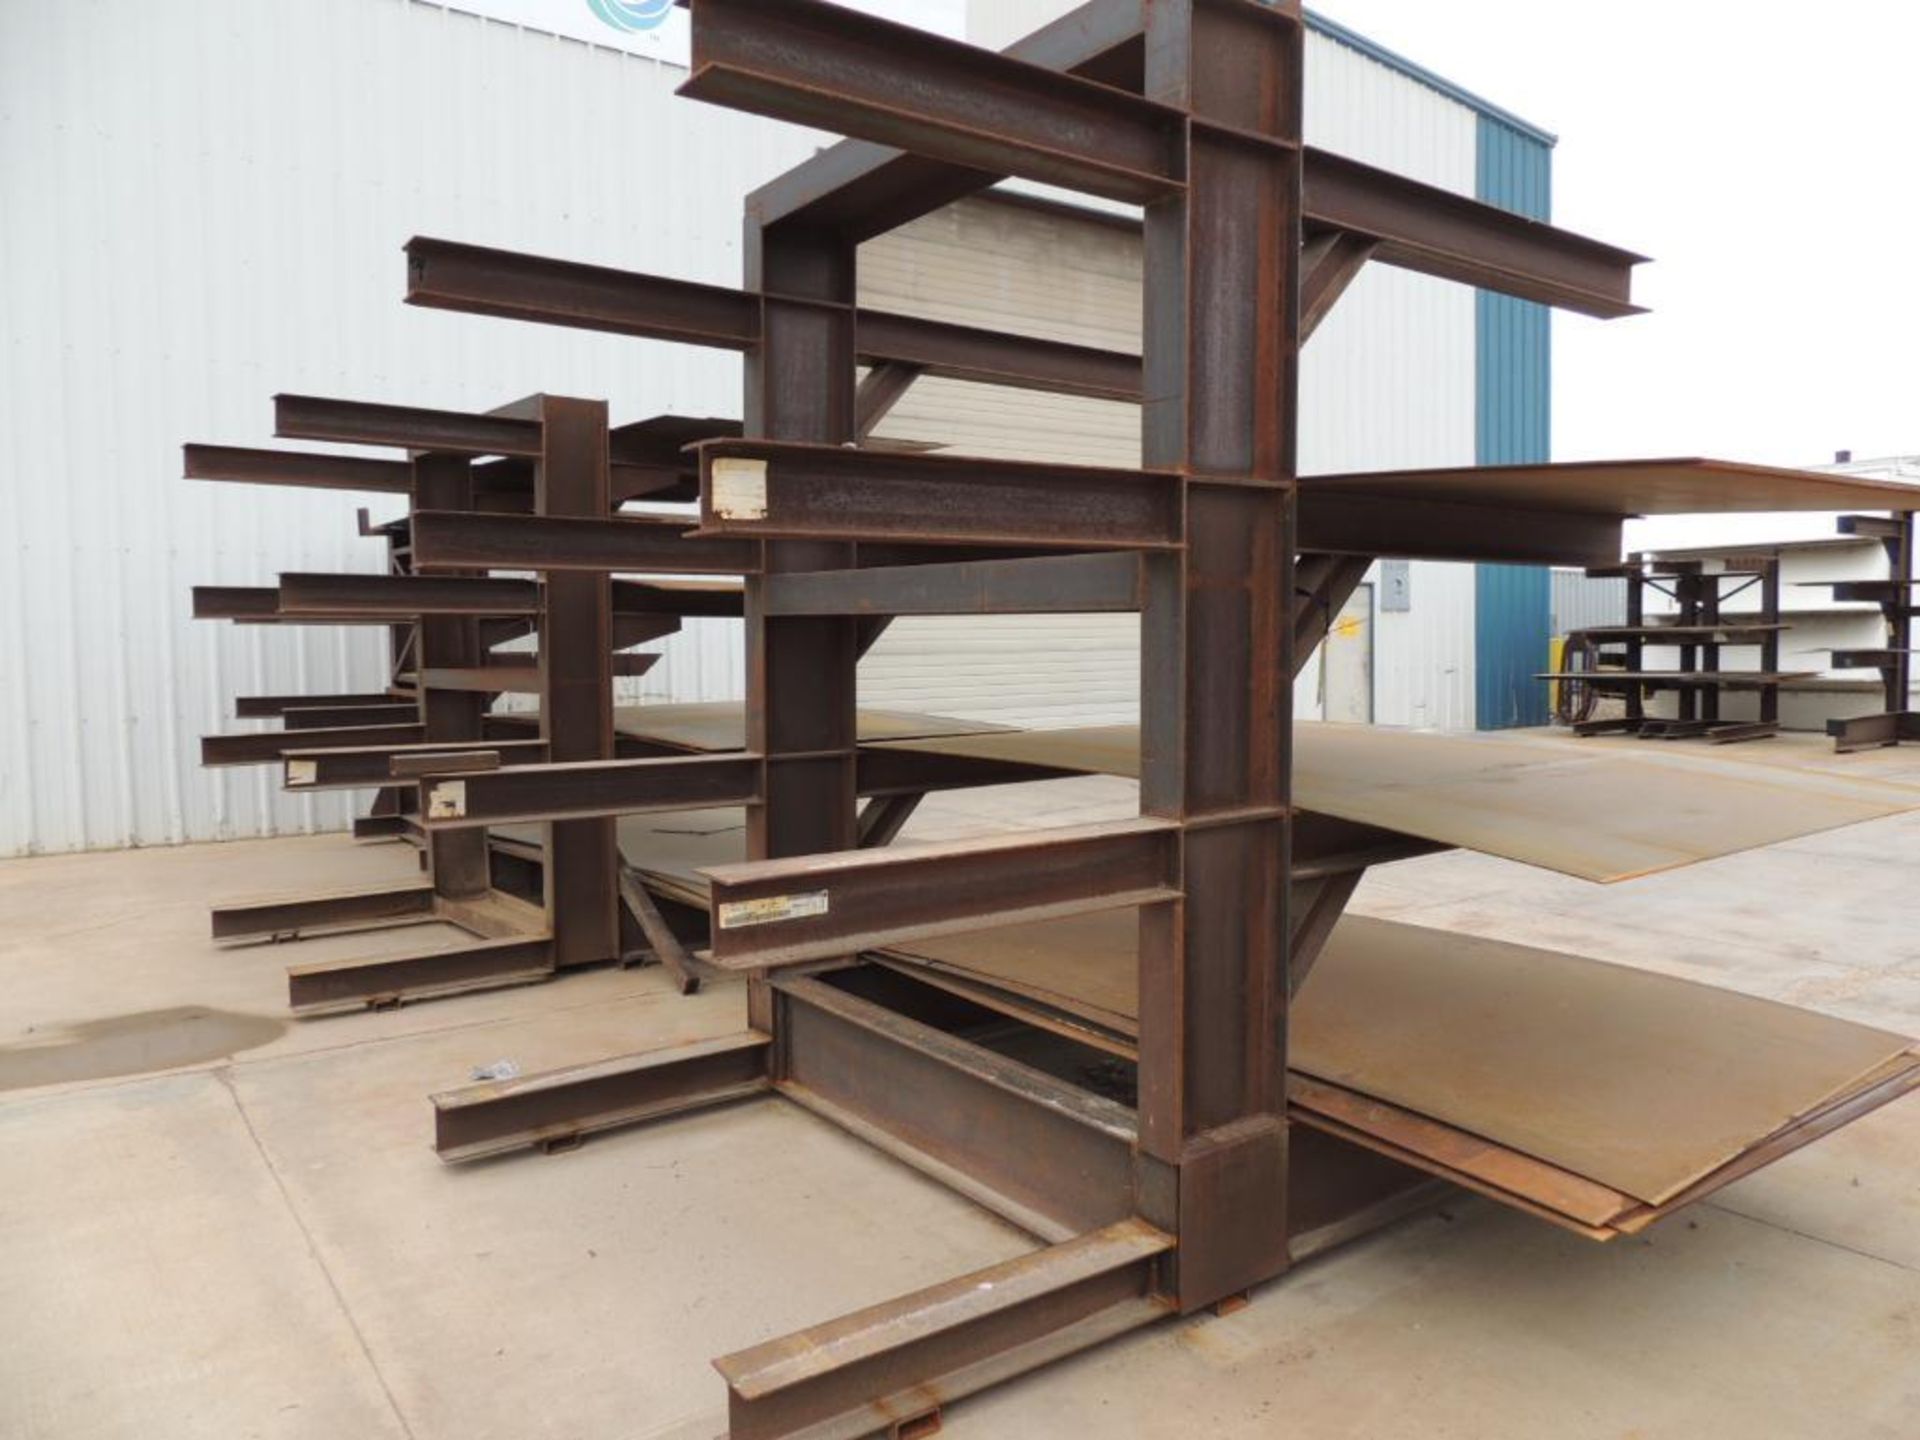 115 in. Wide x 5 ft. Deep x 14 ft. High Double-Leg Double-Side Fabricated I-Beam Material Stand (#14 - Image 2 of 2